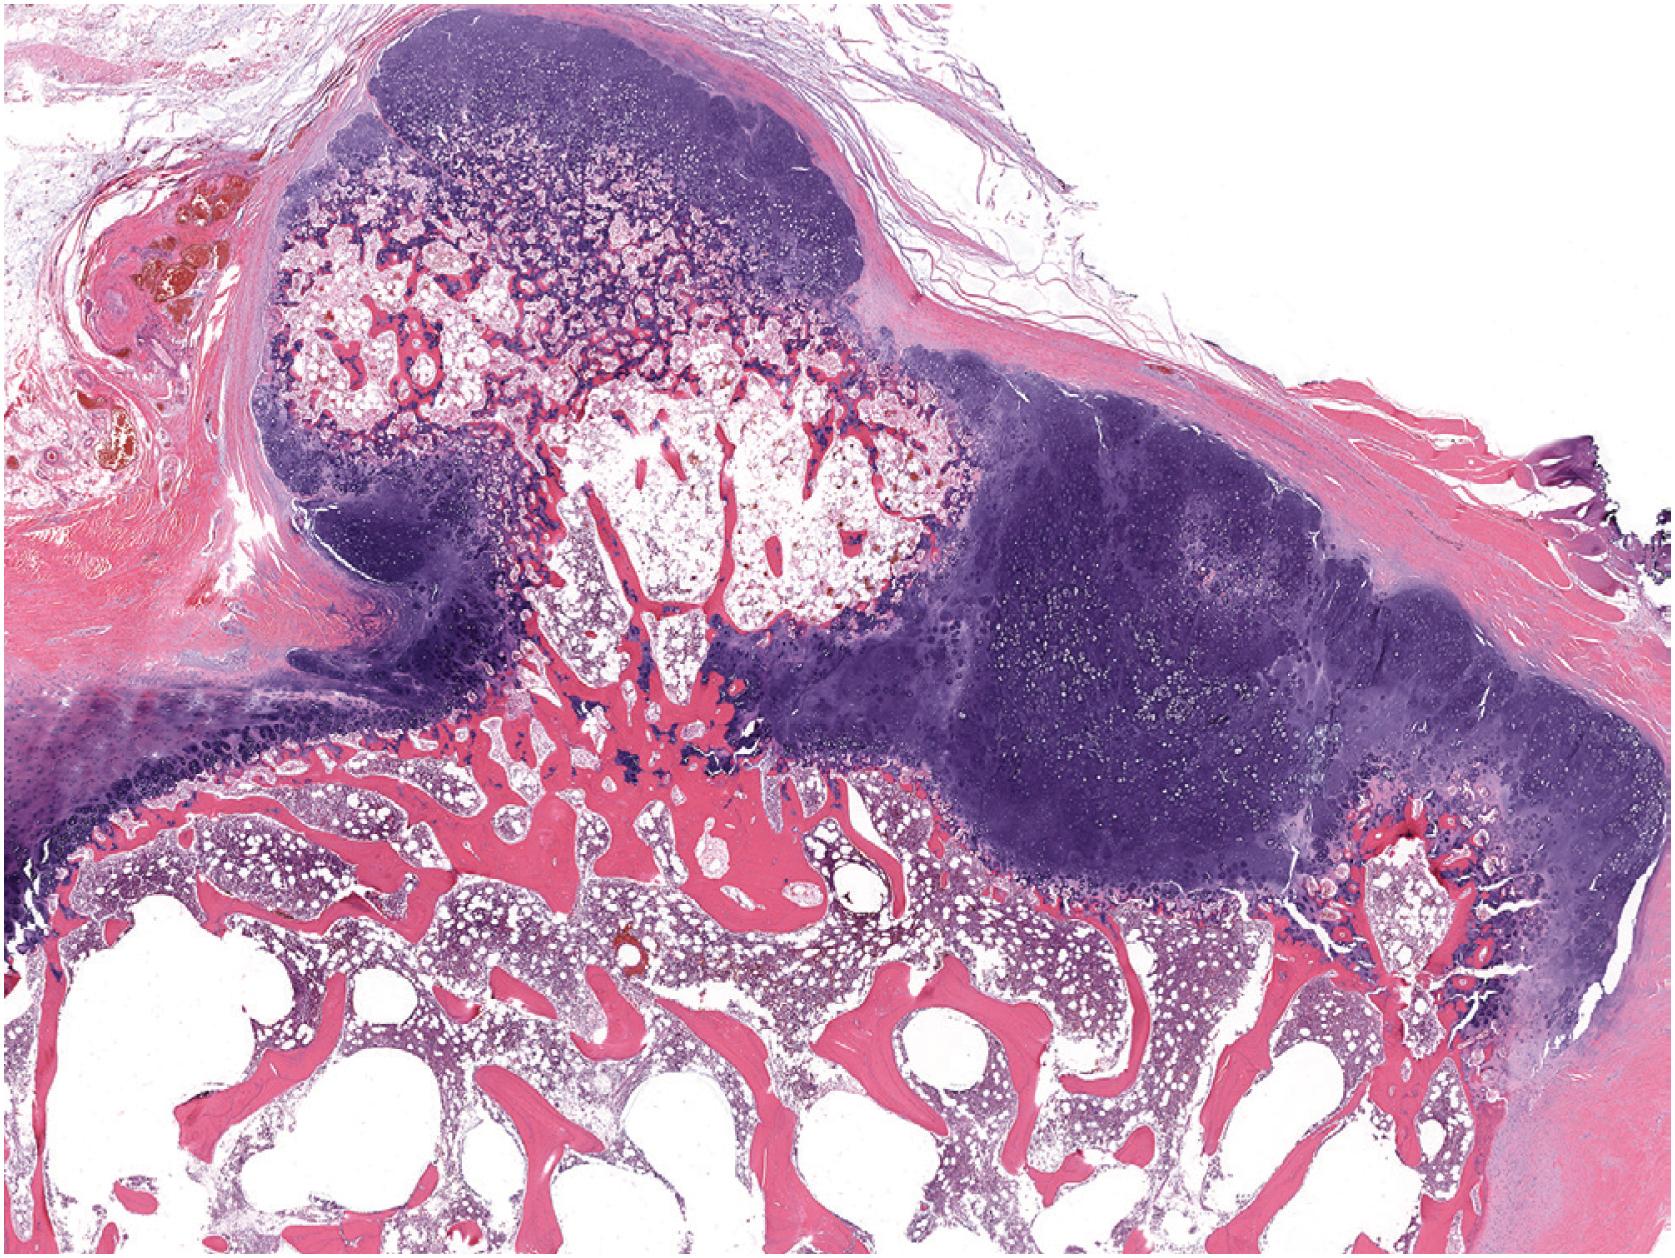 Fig. 17.16, This osteochondroma from a pediatric patient demonstrates cellular hyaline cartilage with endochondral ossification reminiscent of primary spongiosa. These features are seen in tumors affecting the growing skeleton.